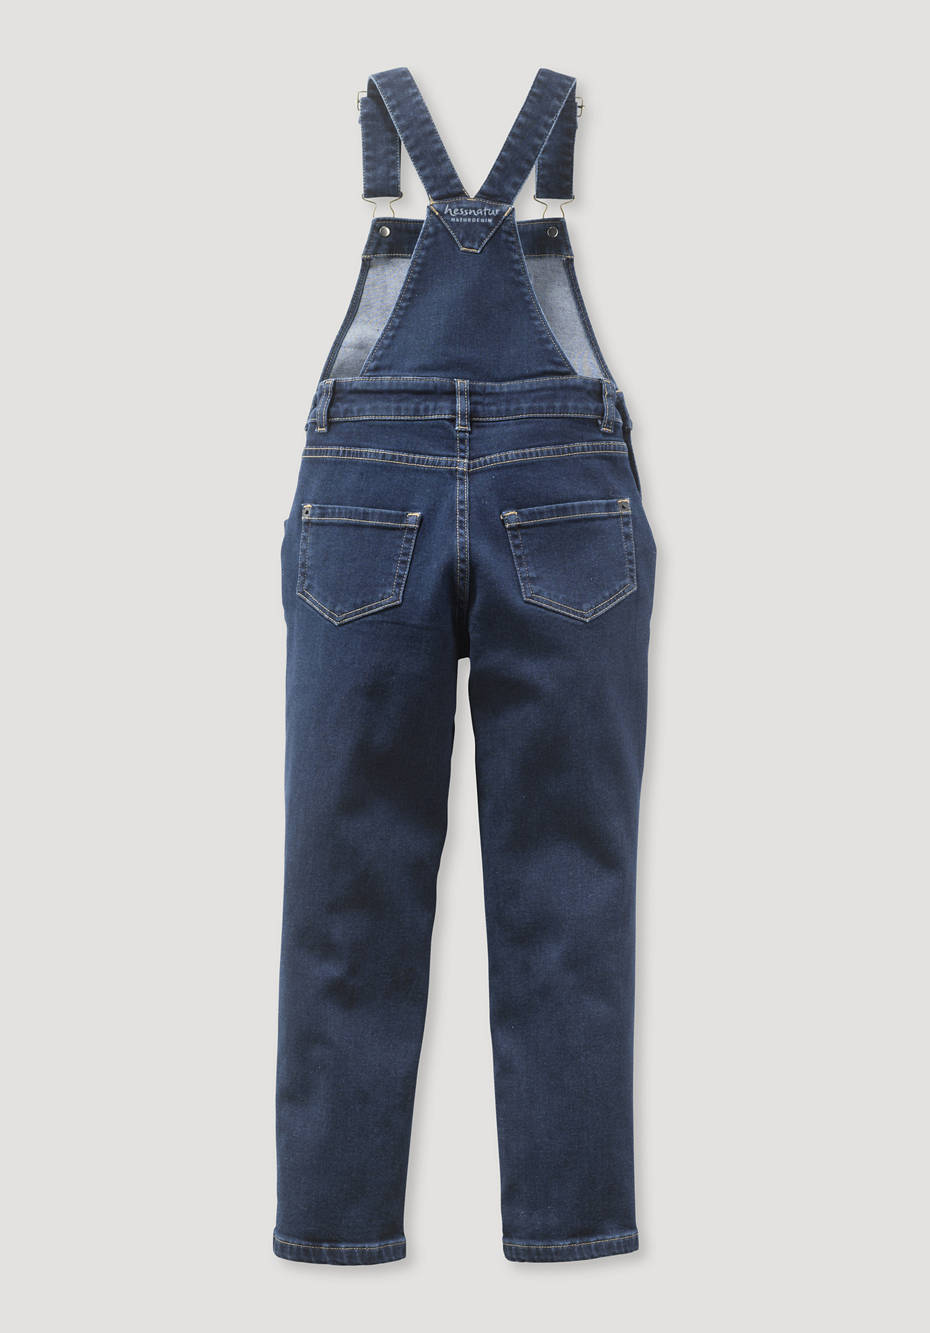 BetterRecycling dungarees made from organic denim